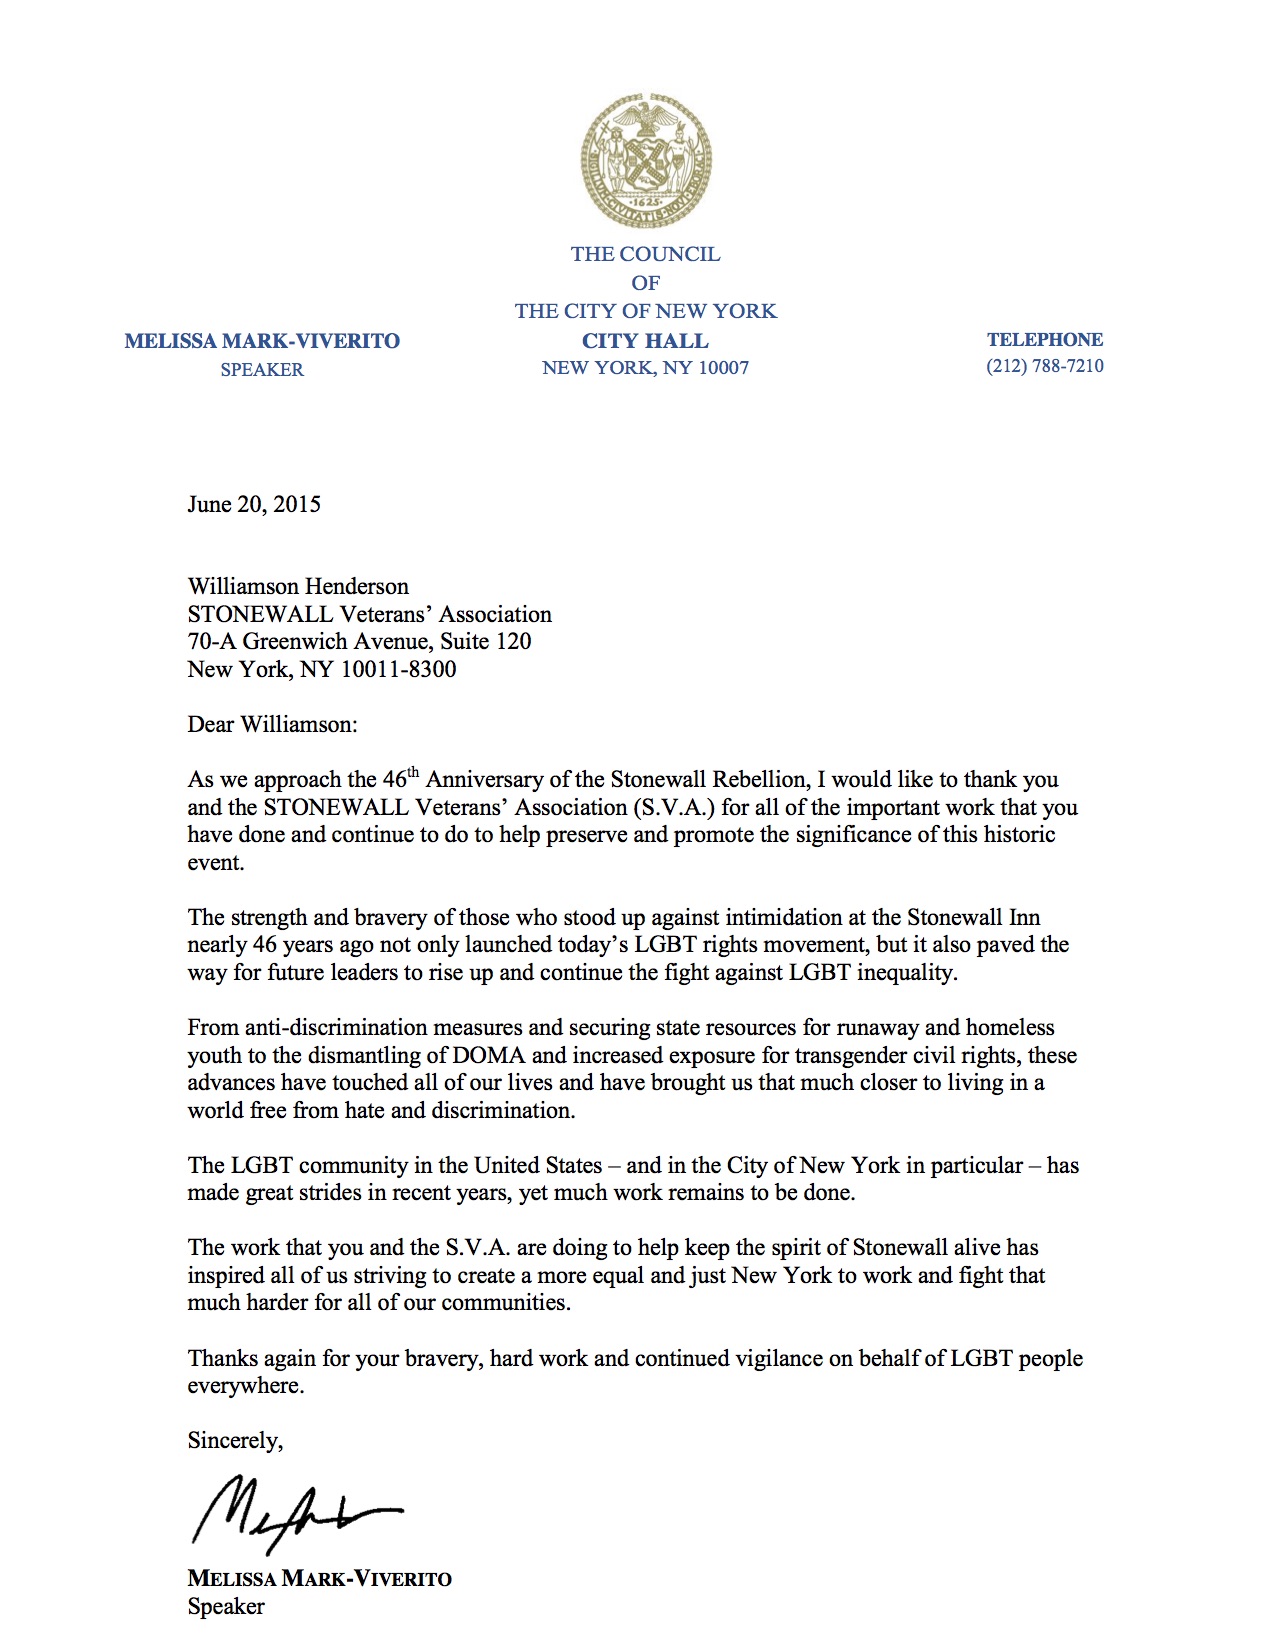 2015 - Council Speaker Melissa Viverito's Letter to the STONEWALL Vets